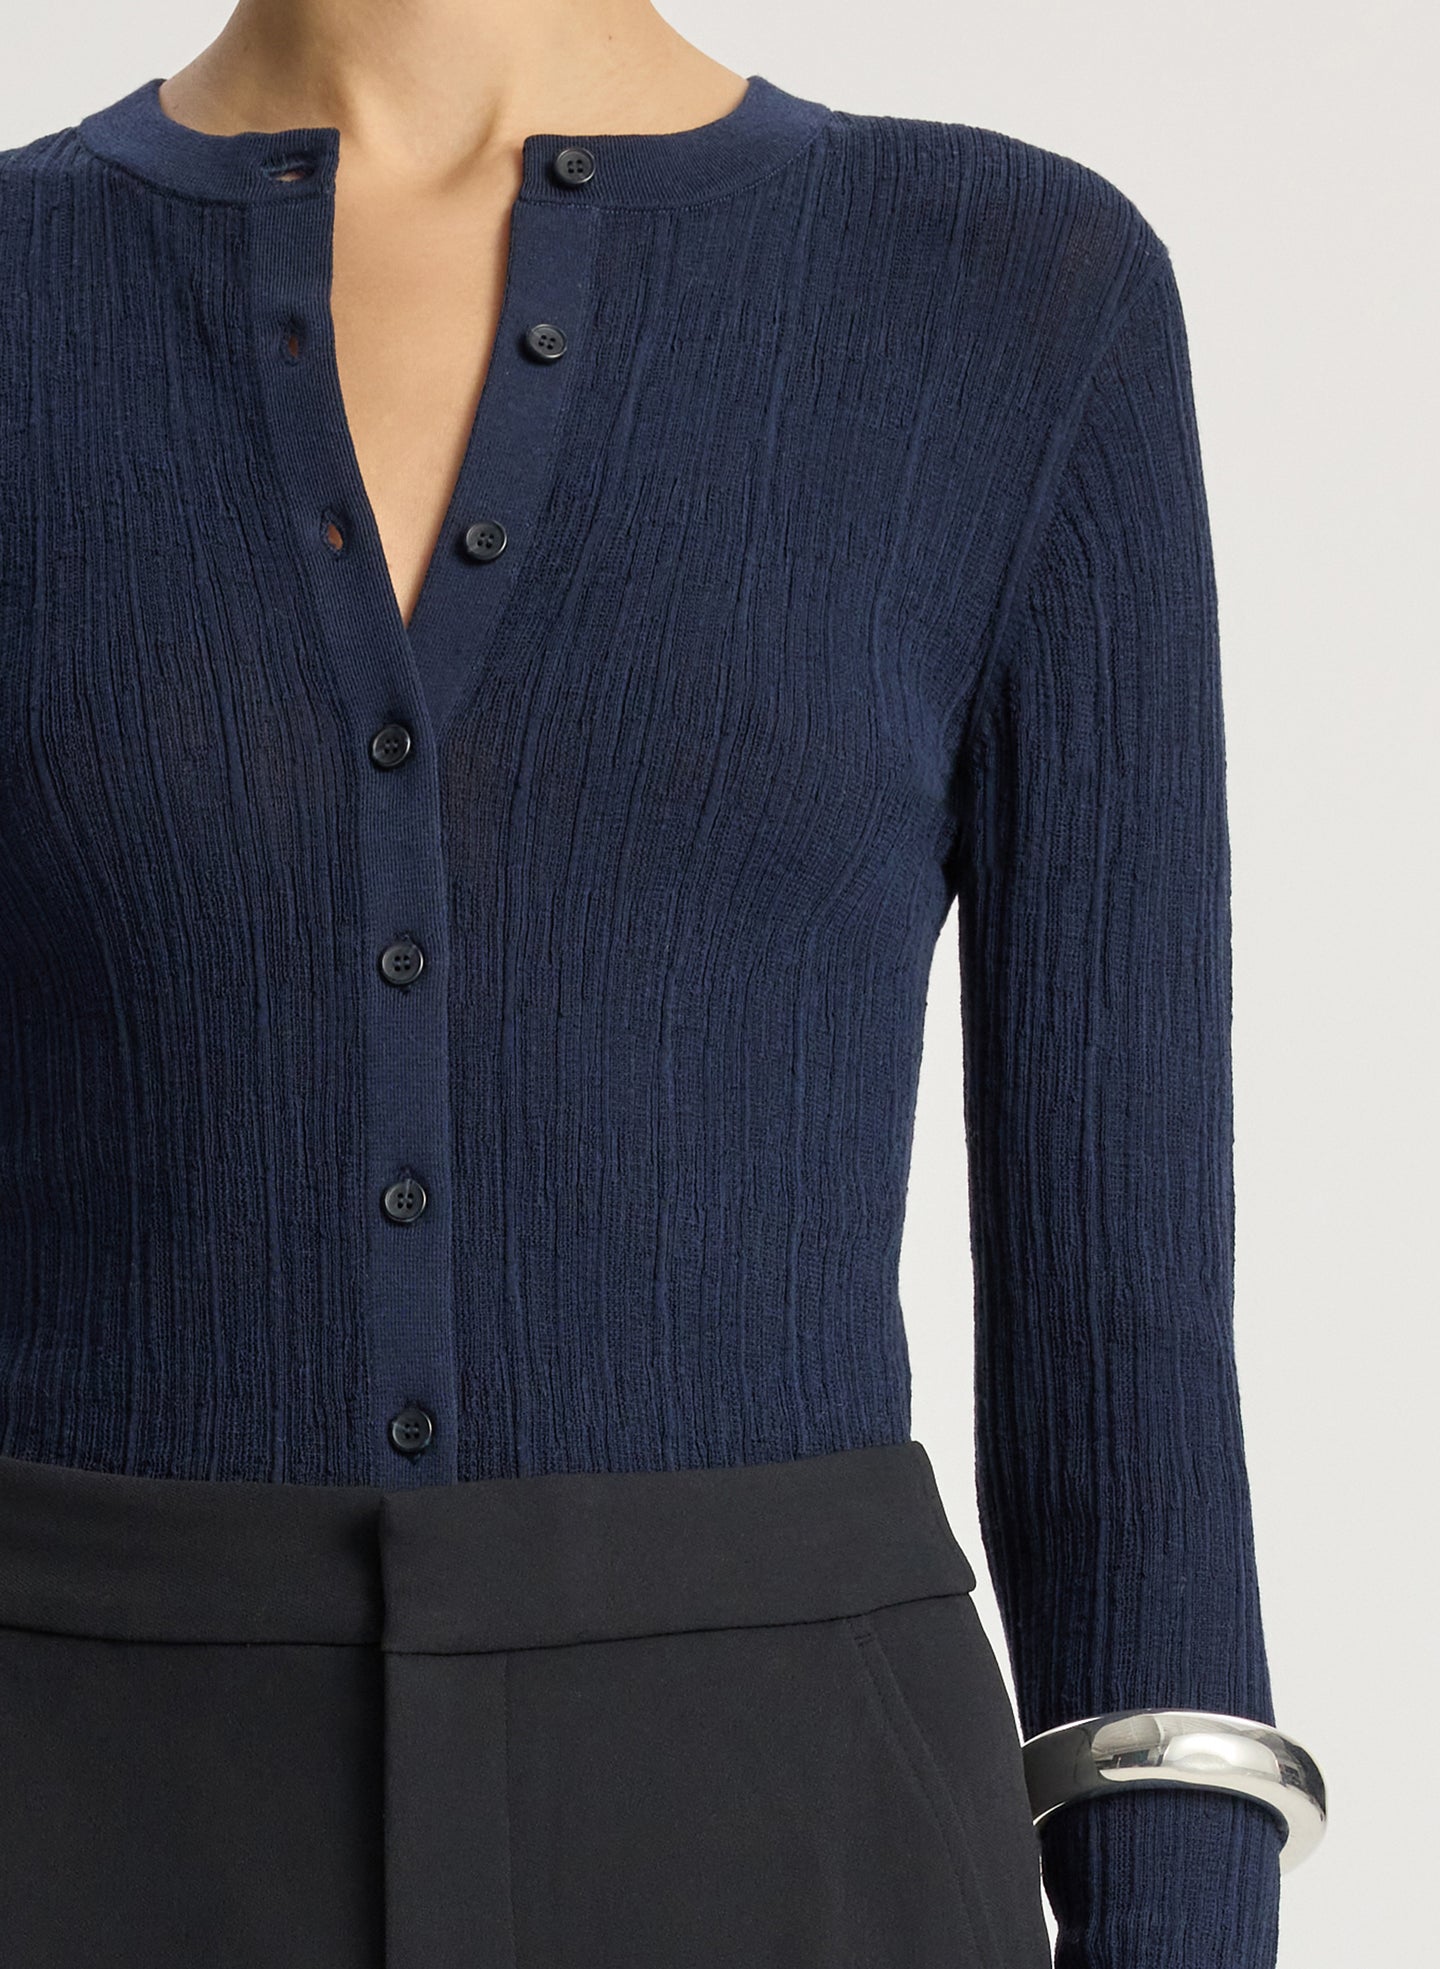 detail view of woman wearing navy cardigan and black flared pants